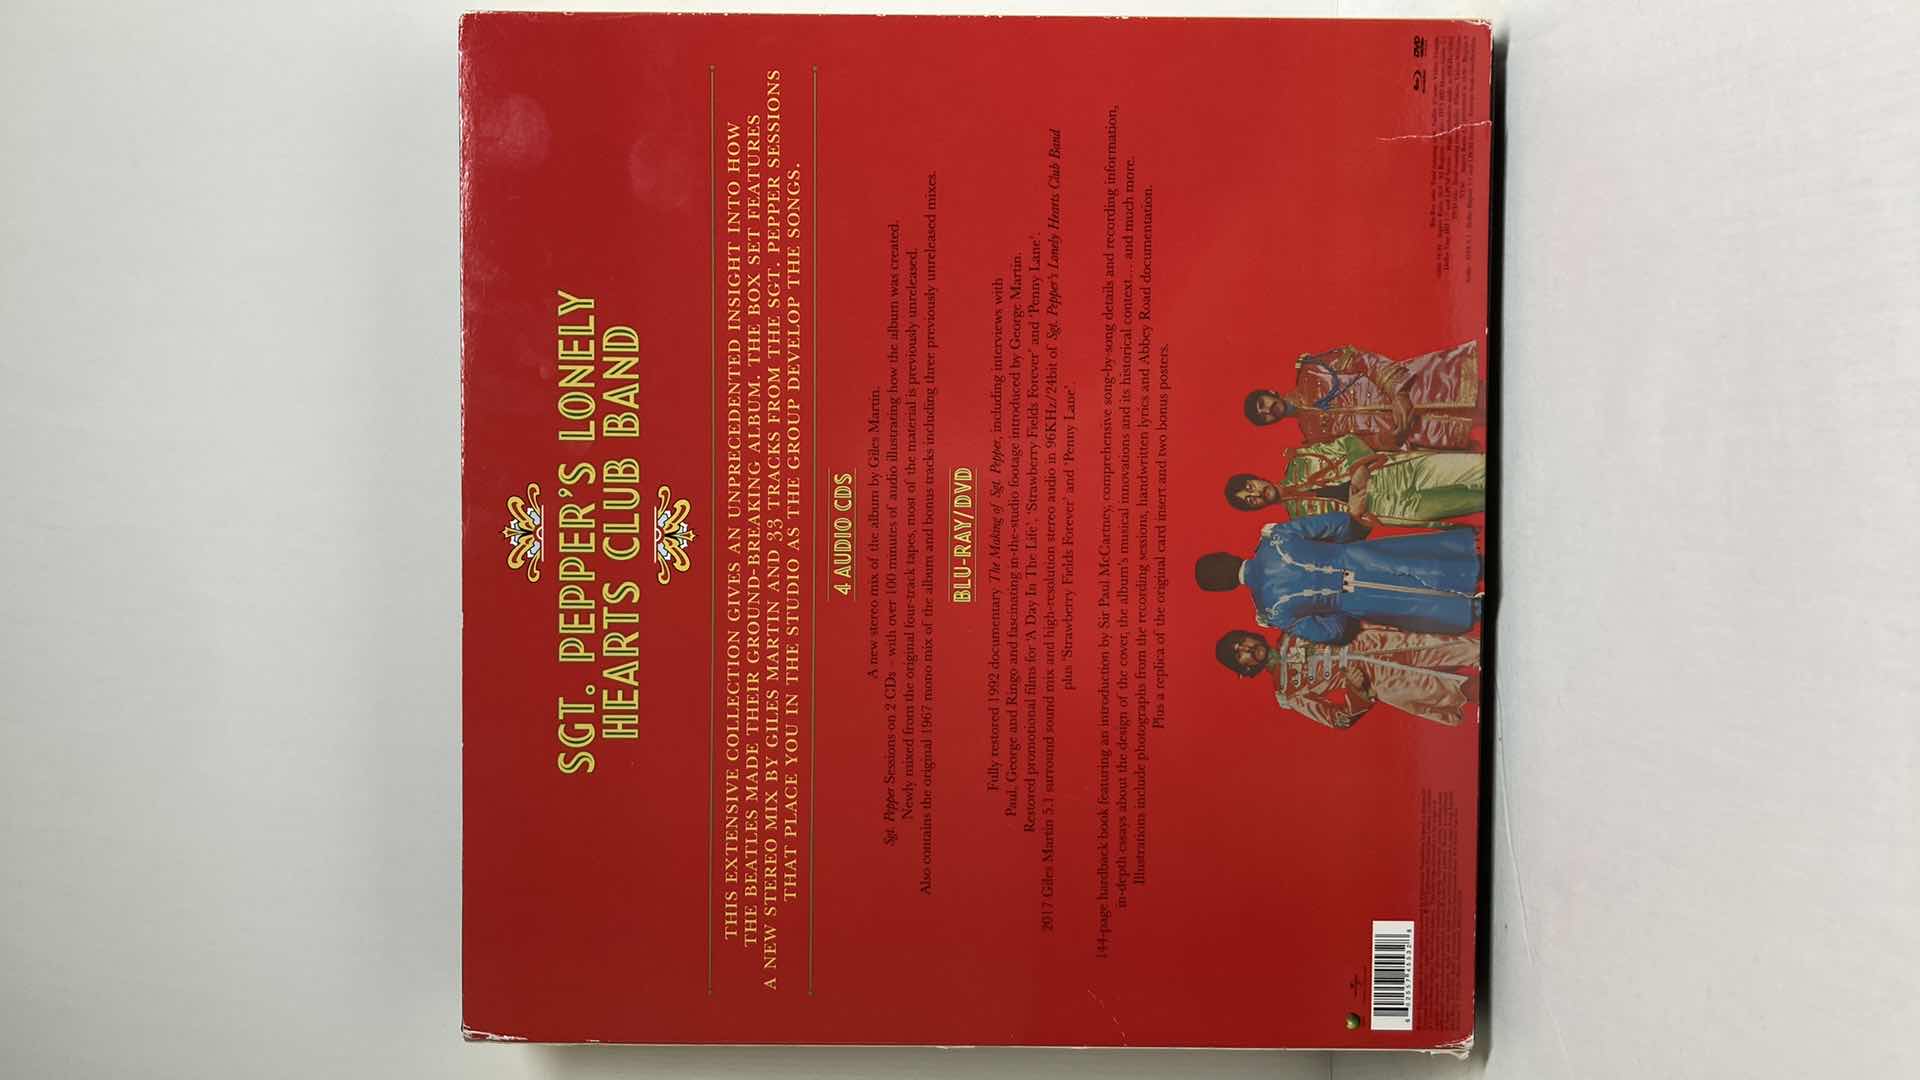 Photo 4 of NEW THE BEATLES SGT. PEPPERS LONELY HEARTS CLUB BAND BOX SET